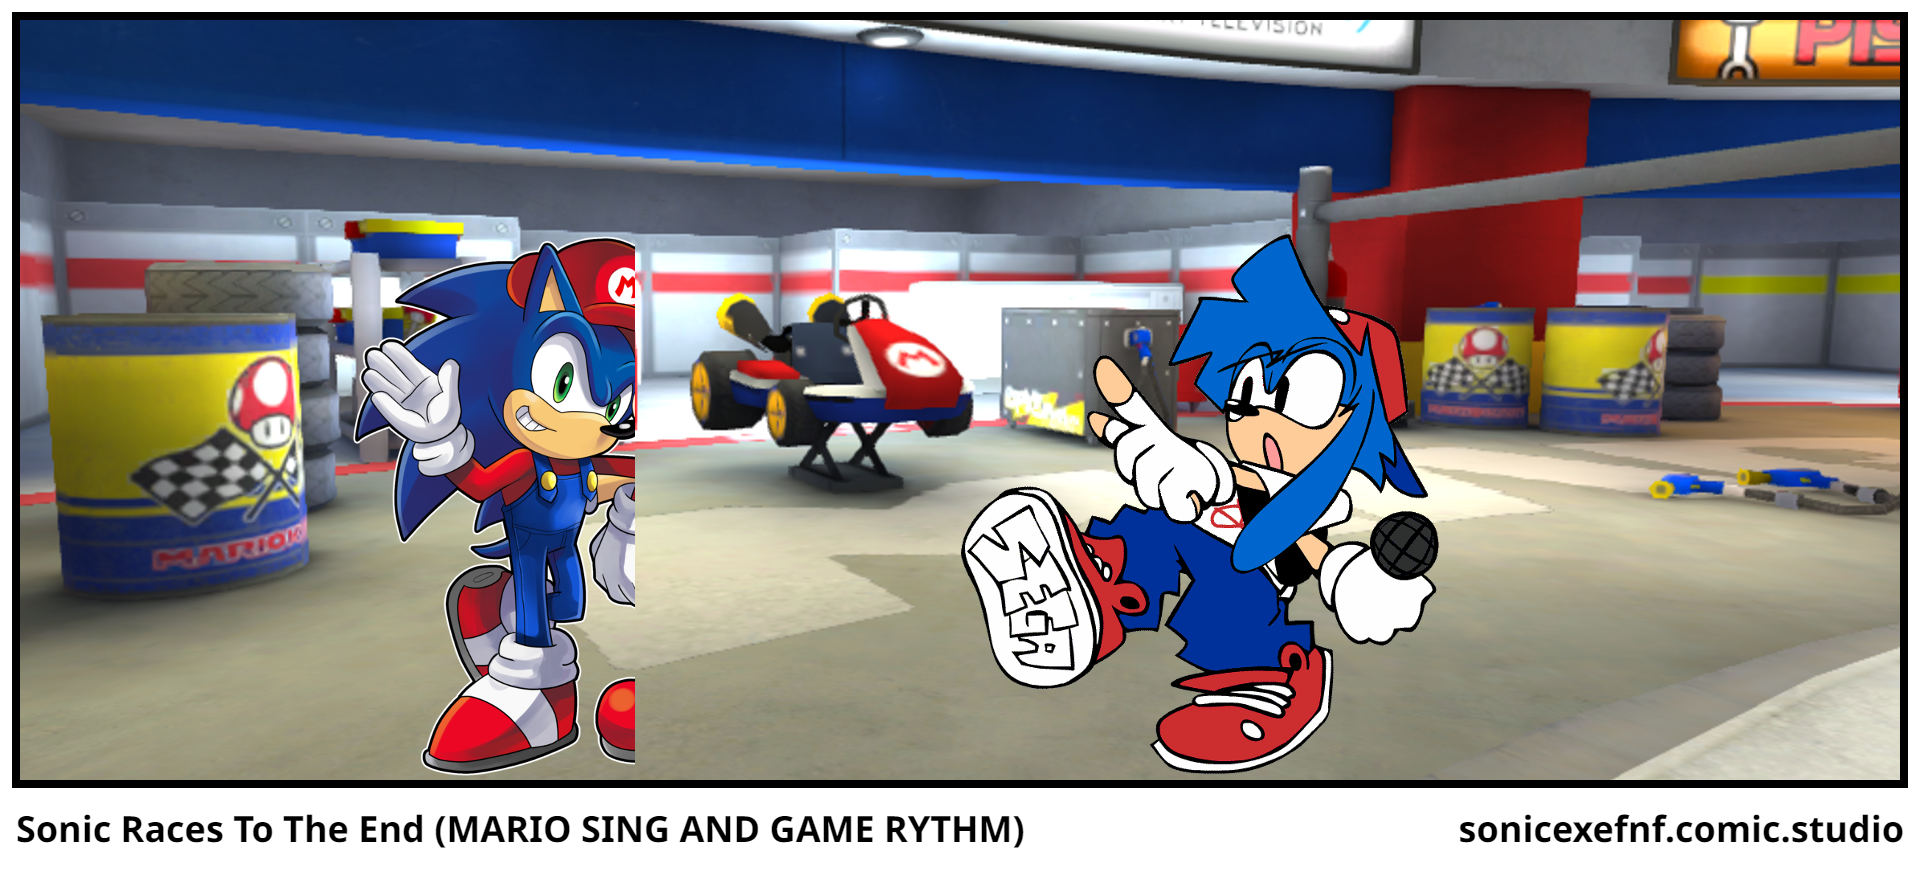 Sonic Races To The End (MARIO SING AND GAME RYTHM)